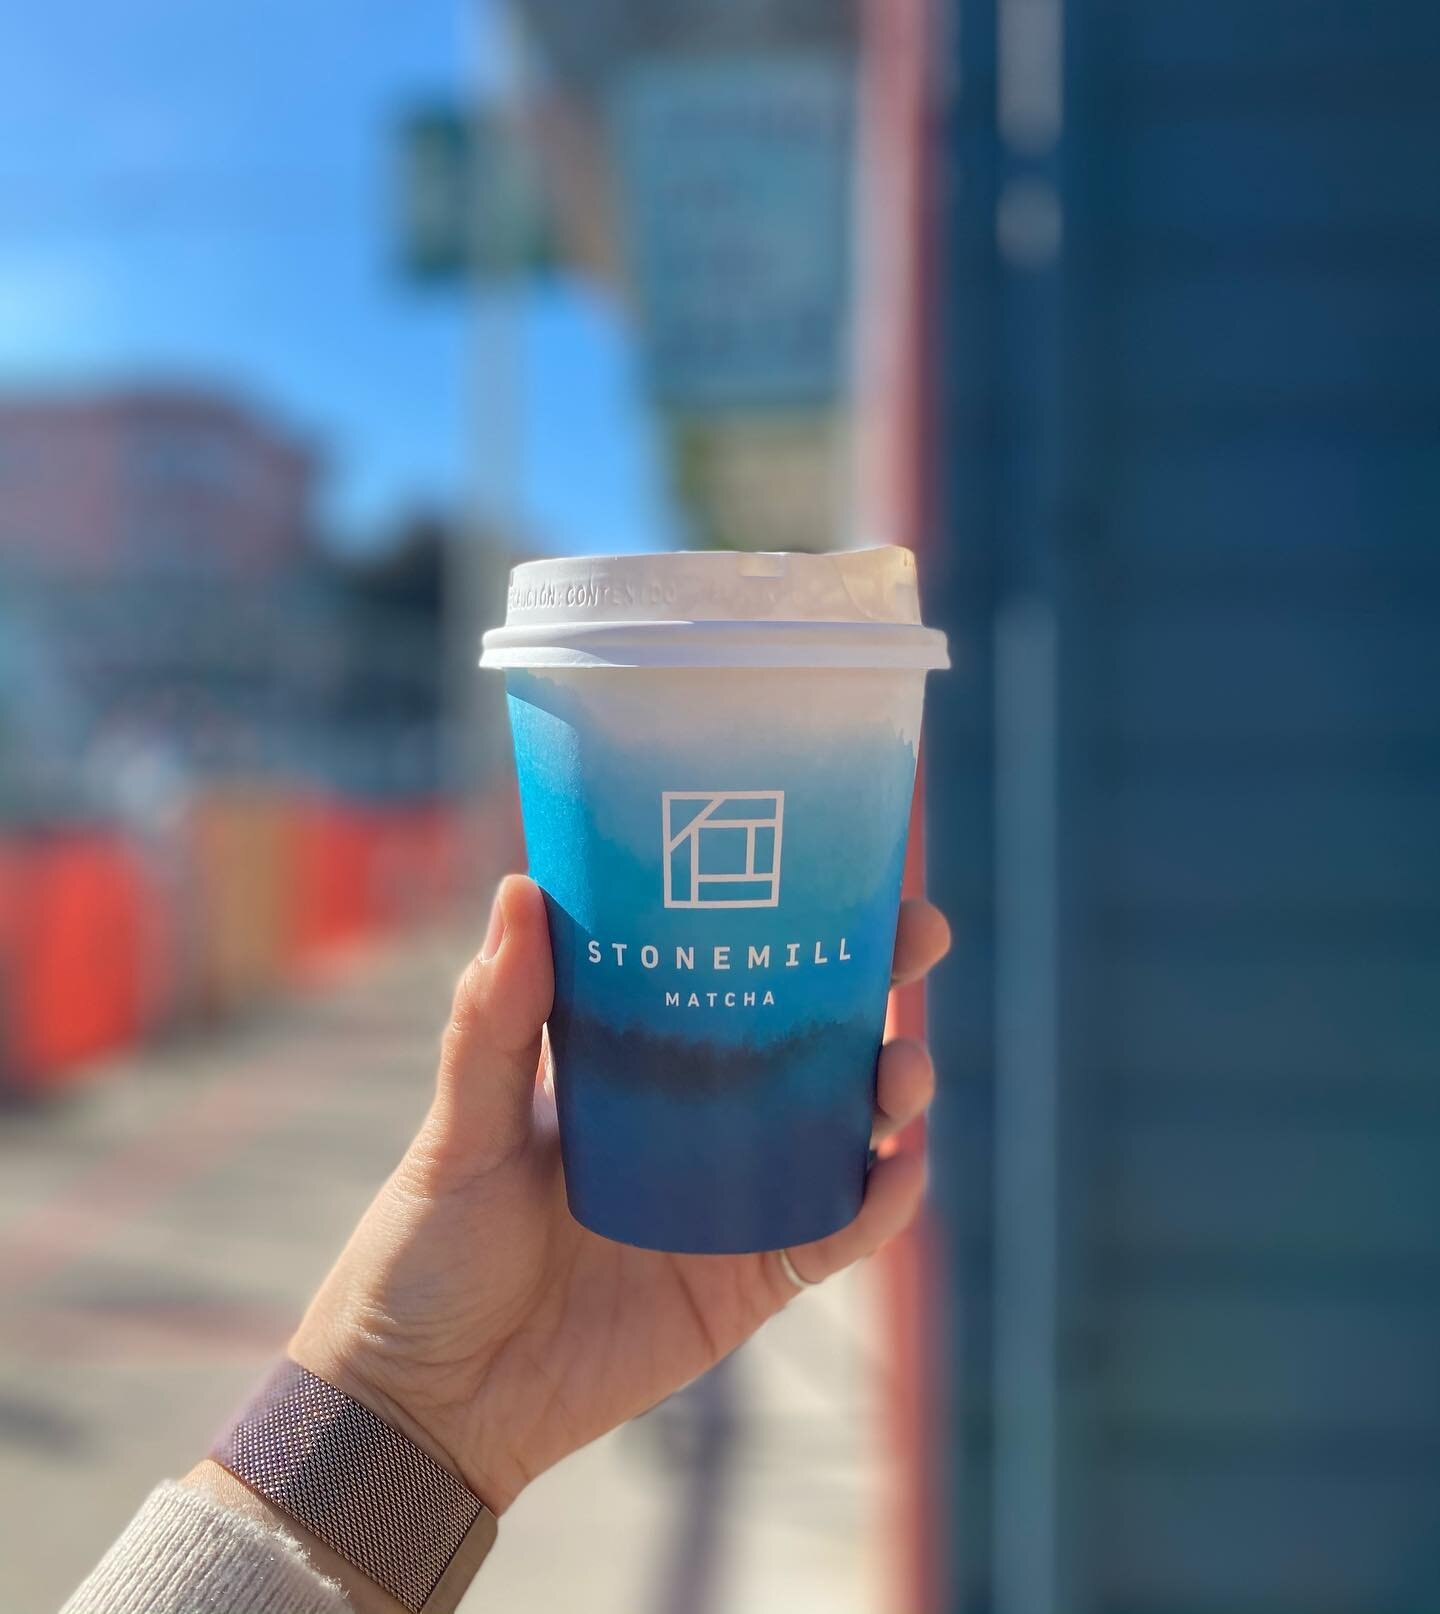 finally made time for a city day ft. @stonemillmatcha&rsquo;s hojicha latte 😋 swipe to see their user-friendly lid!! seals your to-go cup ☕️ in-transit 🚗 and reduces exposure to outside elements #thelittlethingsmatter

UXDate: I haven&rsquo;t made 